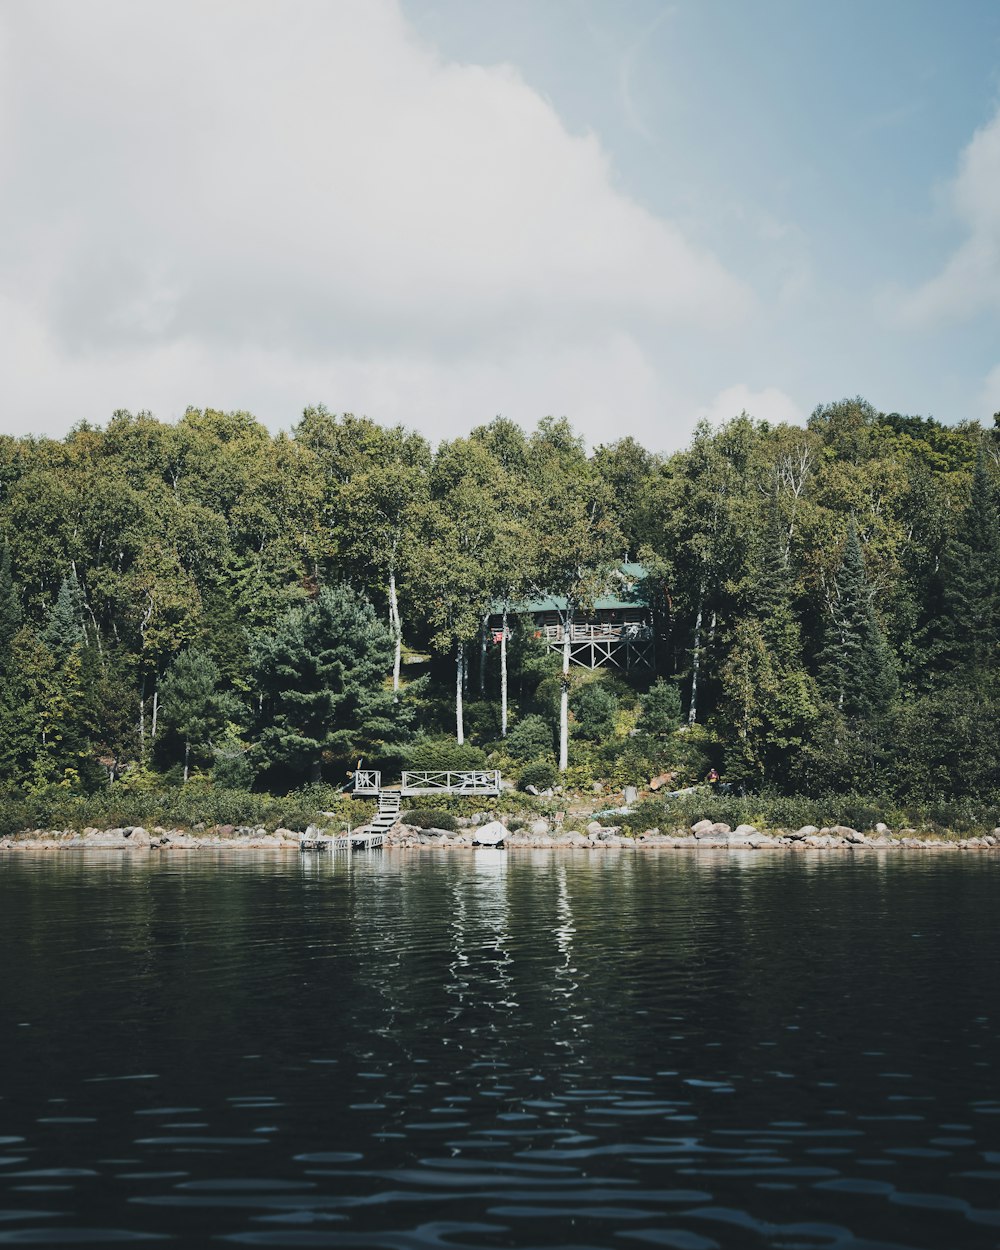 a house on the shore of a lake surrounded by trees